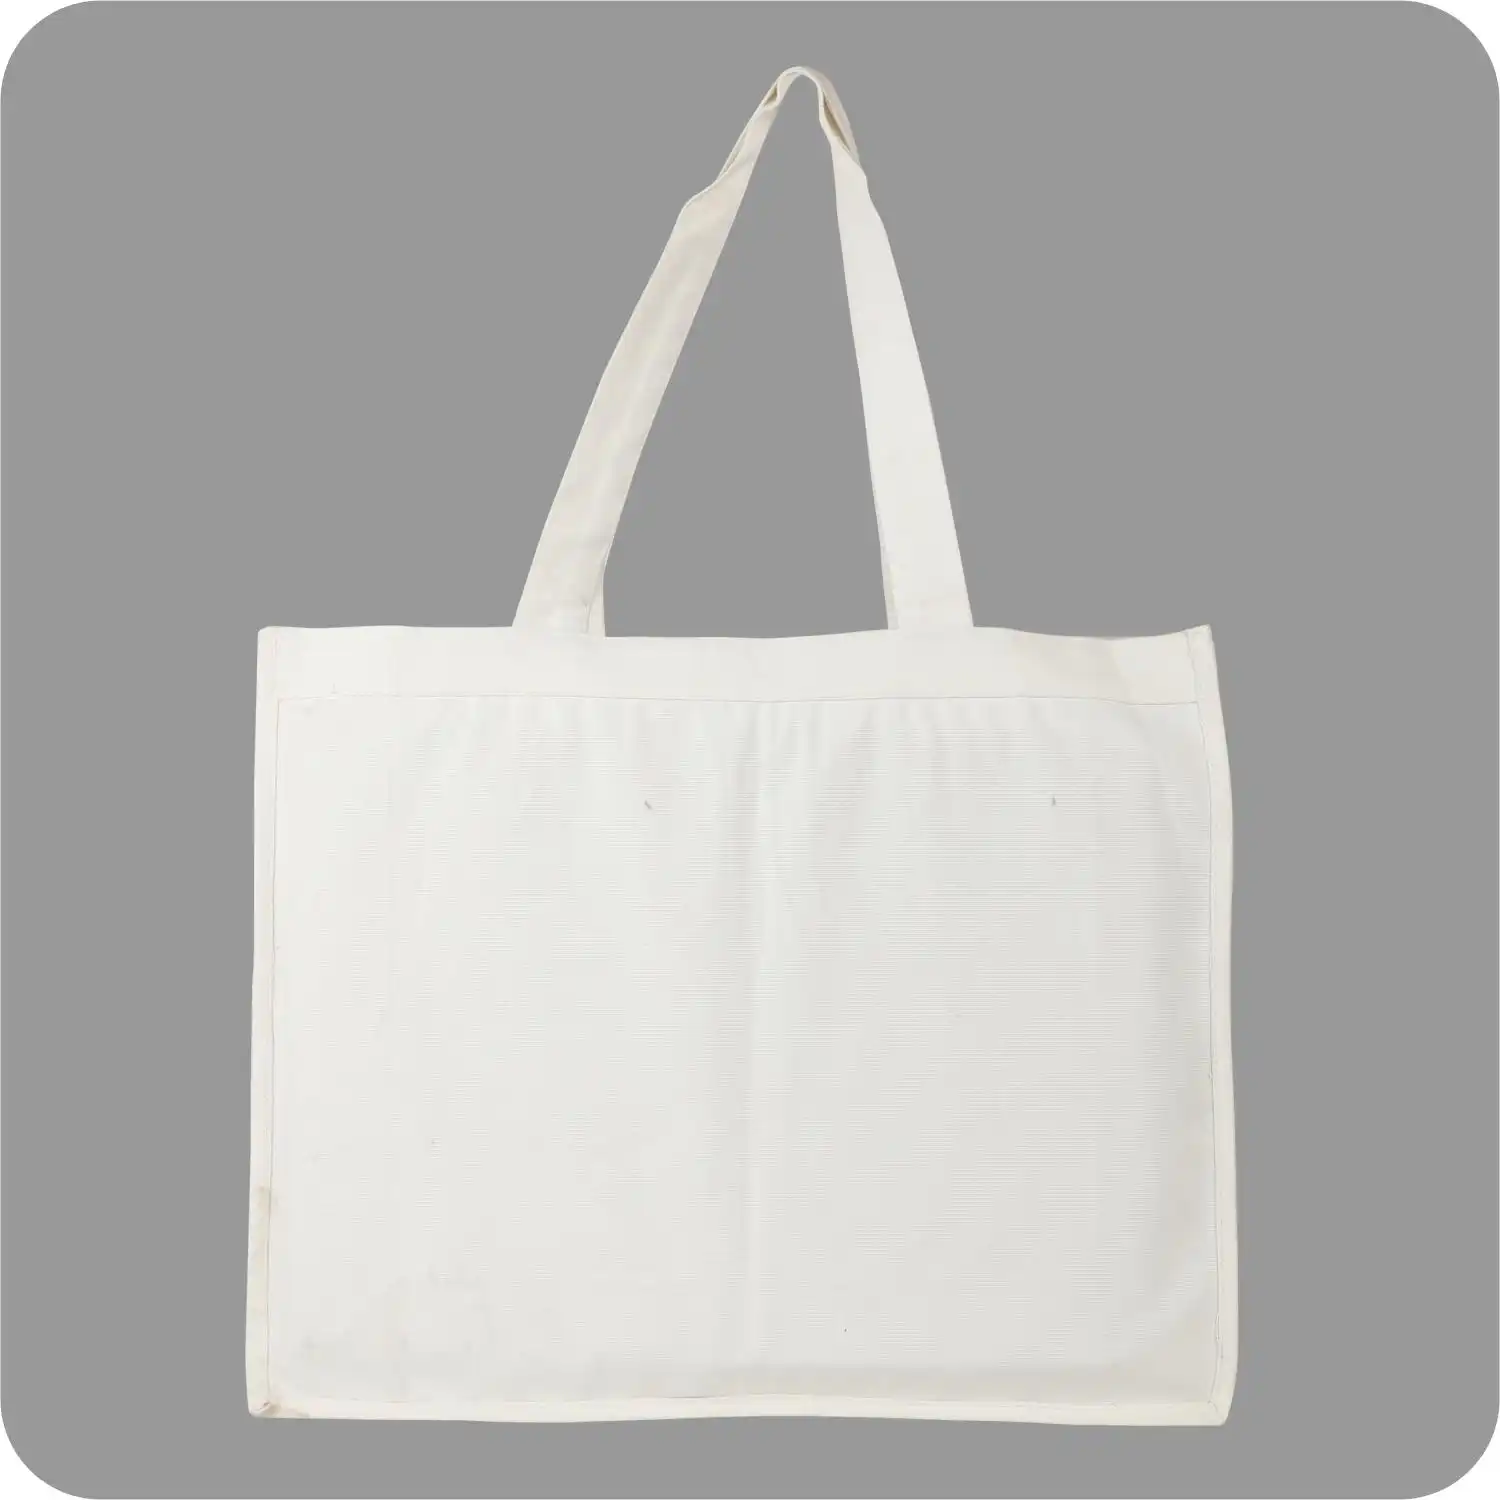 Rectangular Shaped Canvas Bag Carries Heavy Weight